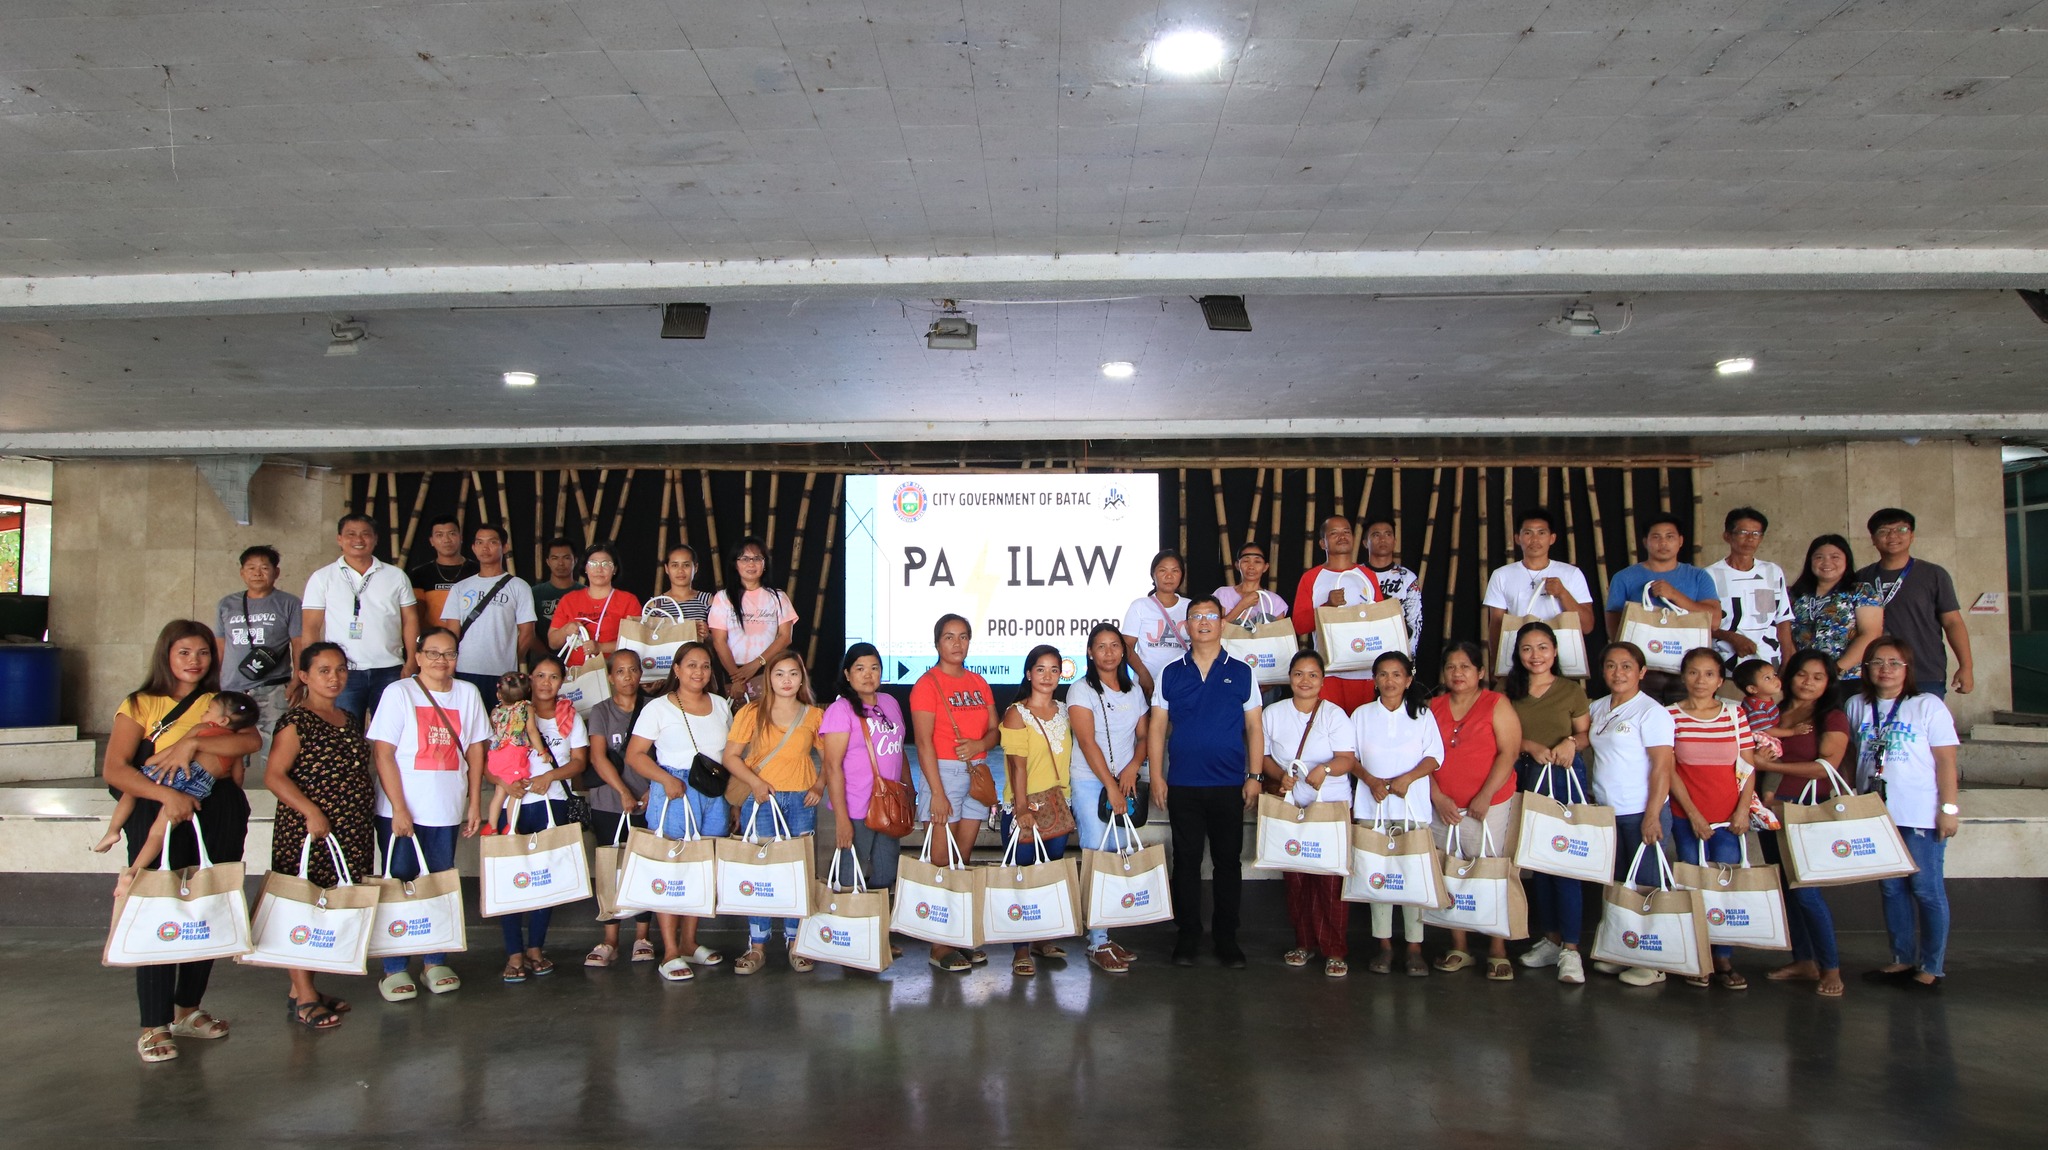 CGB PROVIDES ELECTRICAL MATERIALS TO PASILAW PRO-POOR PROGRAM BENEFICIARIES